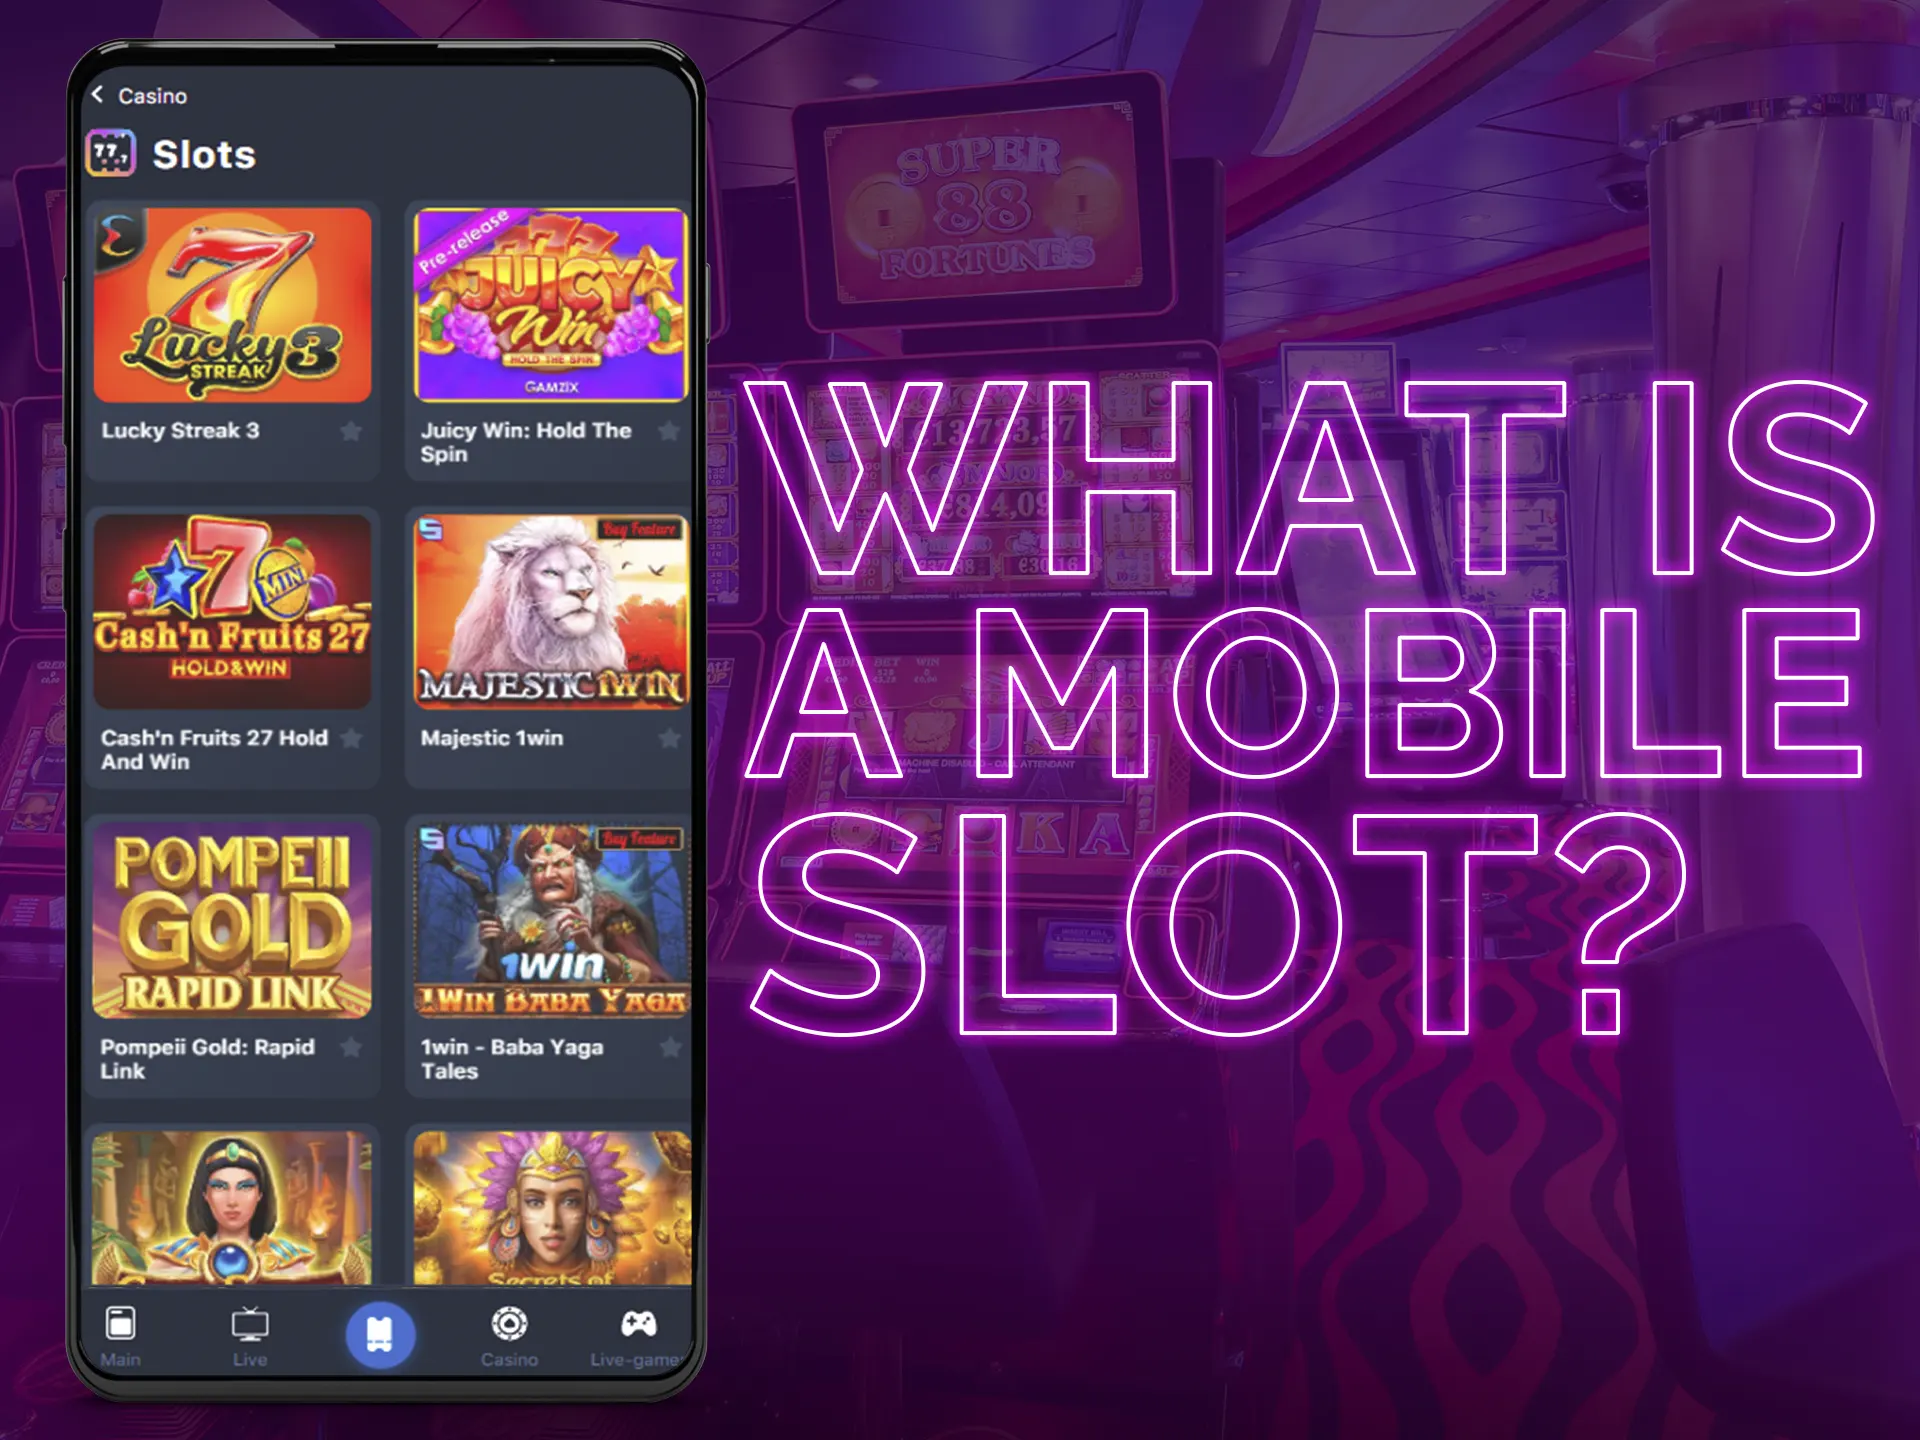 Play mobile slot machines from anywhere in the world.